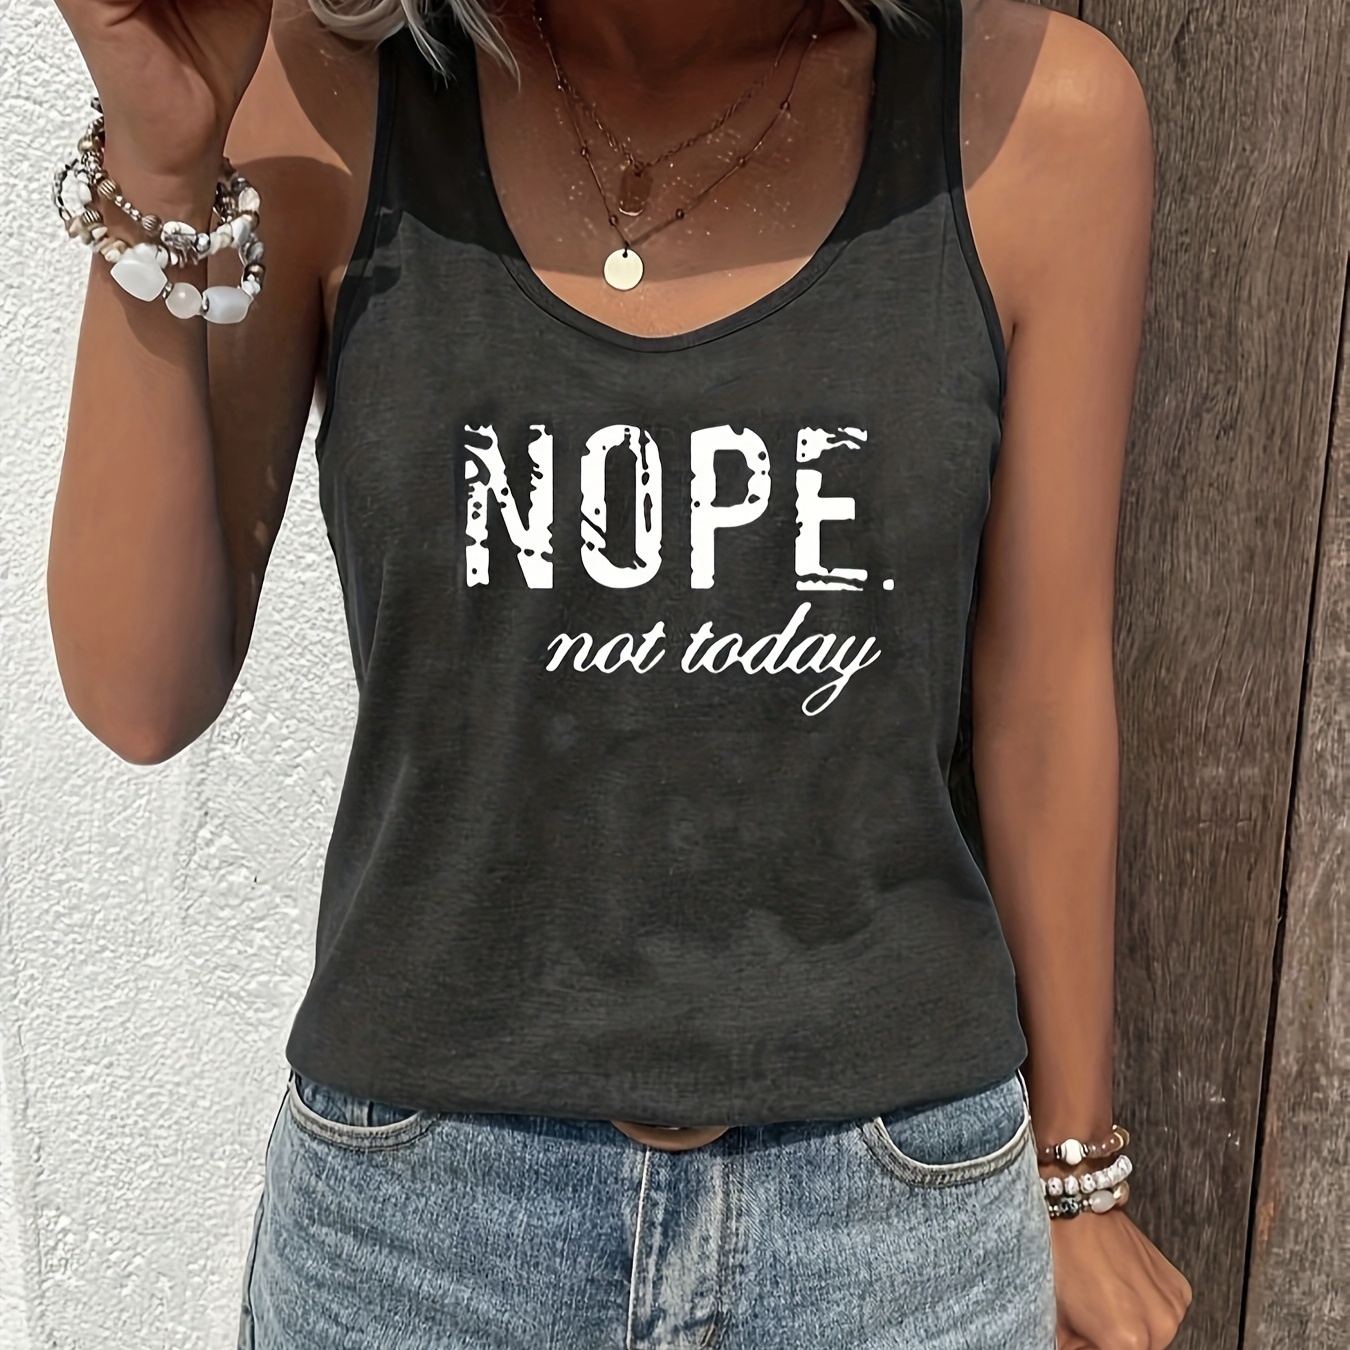 

Nope Not Today Print Tank Top, Casual Sleeveless Tank Top For Summer, Women's Clothing